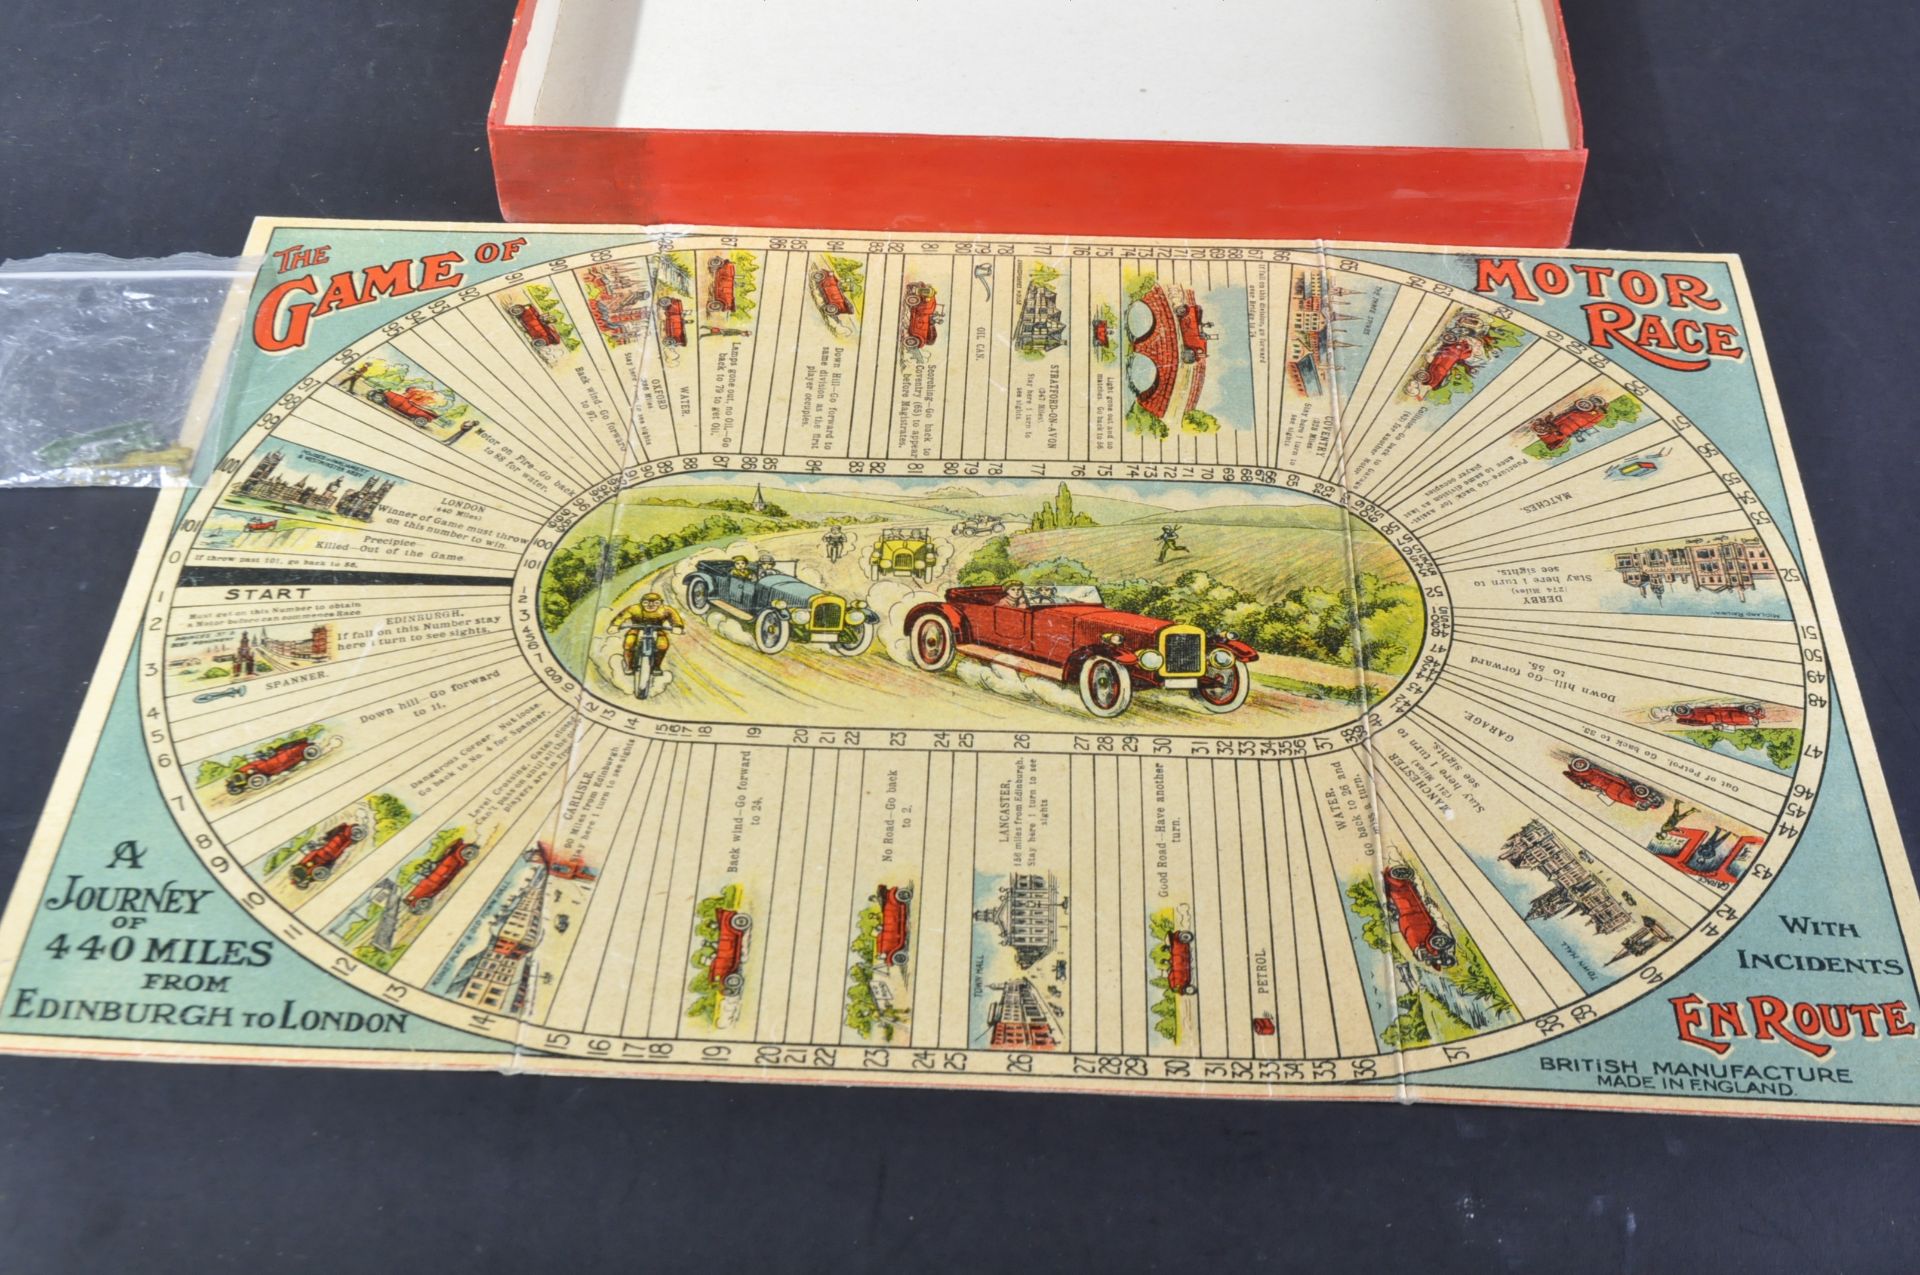 EARLY 20TH CENTURY BRITISH MADE MOTOR RACING BOARD GAME - Image 2 of 4